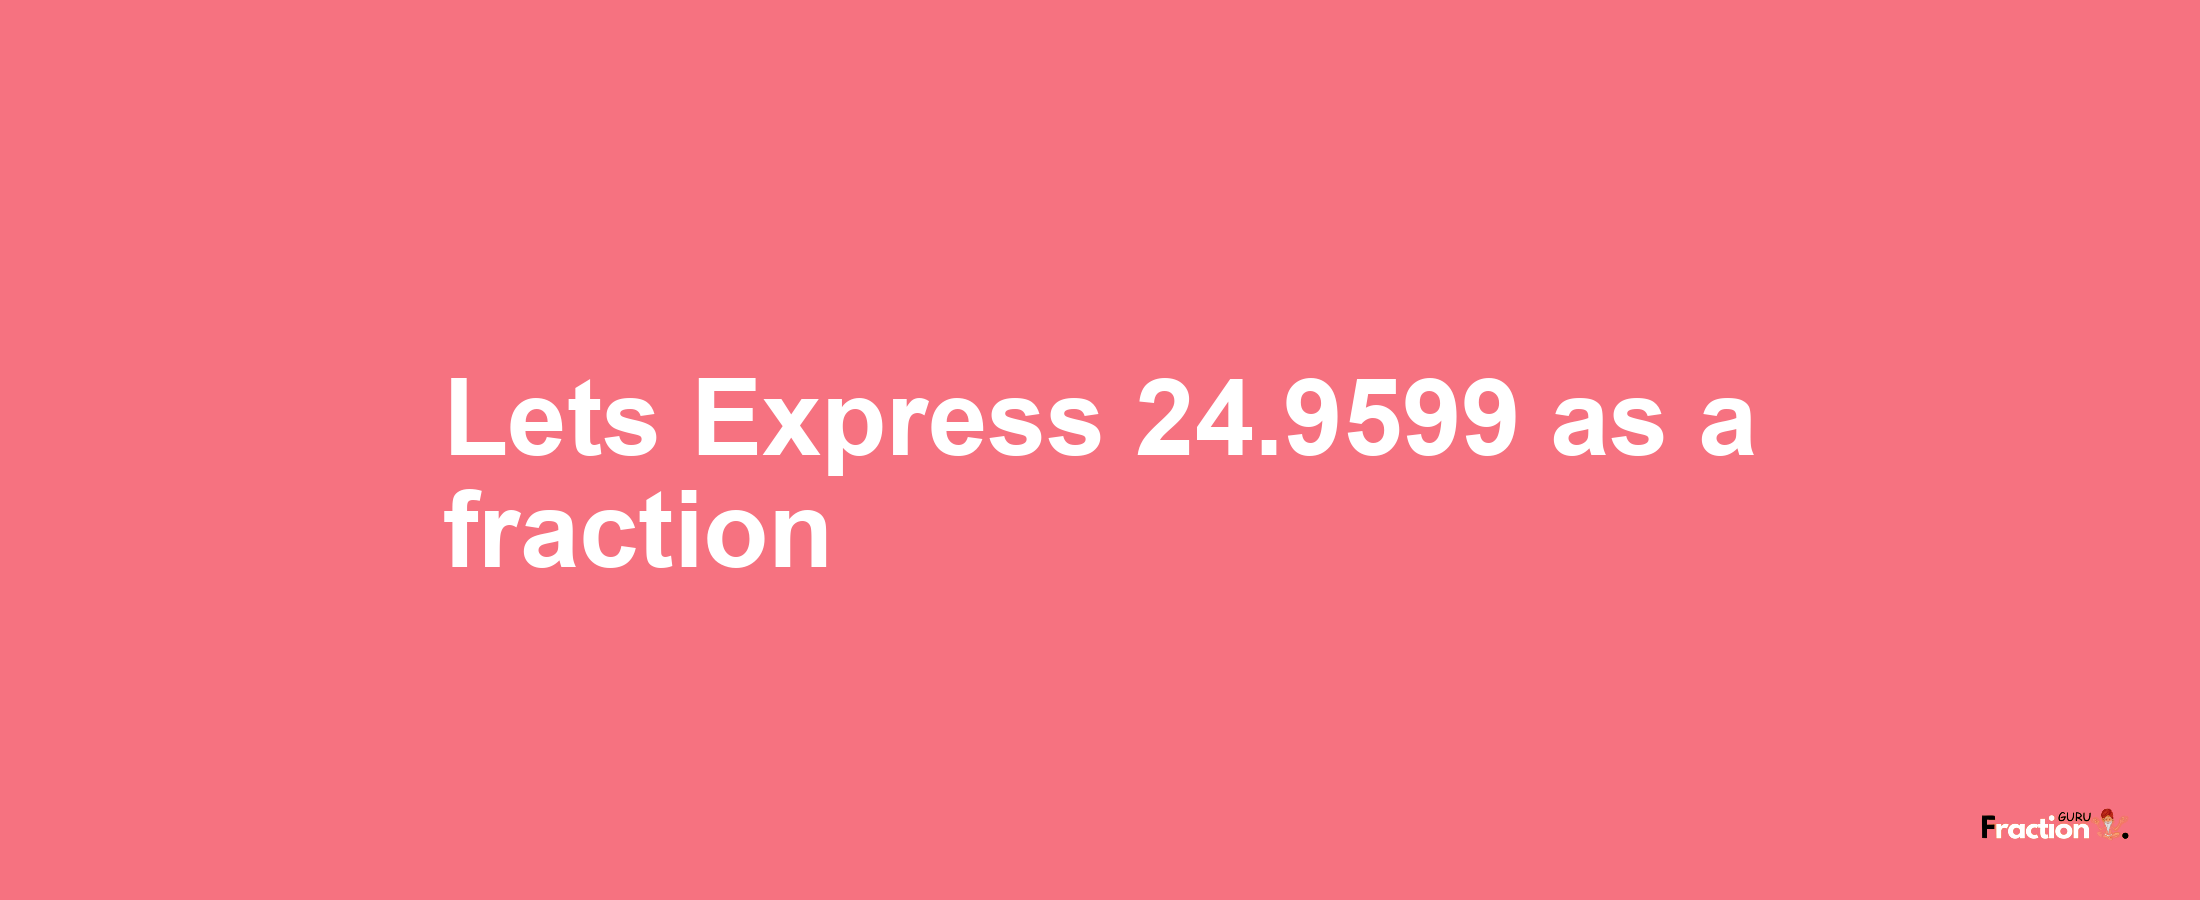 Lets Express 24.9599 as afraction